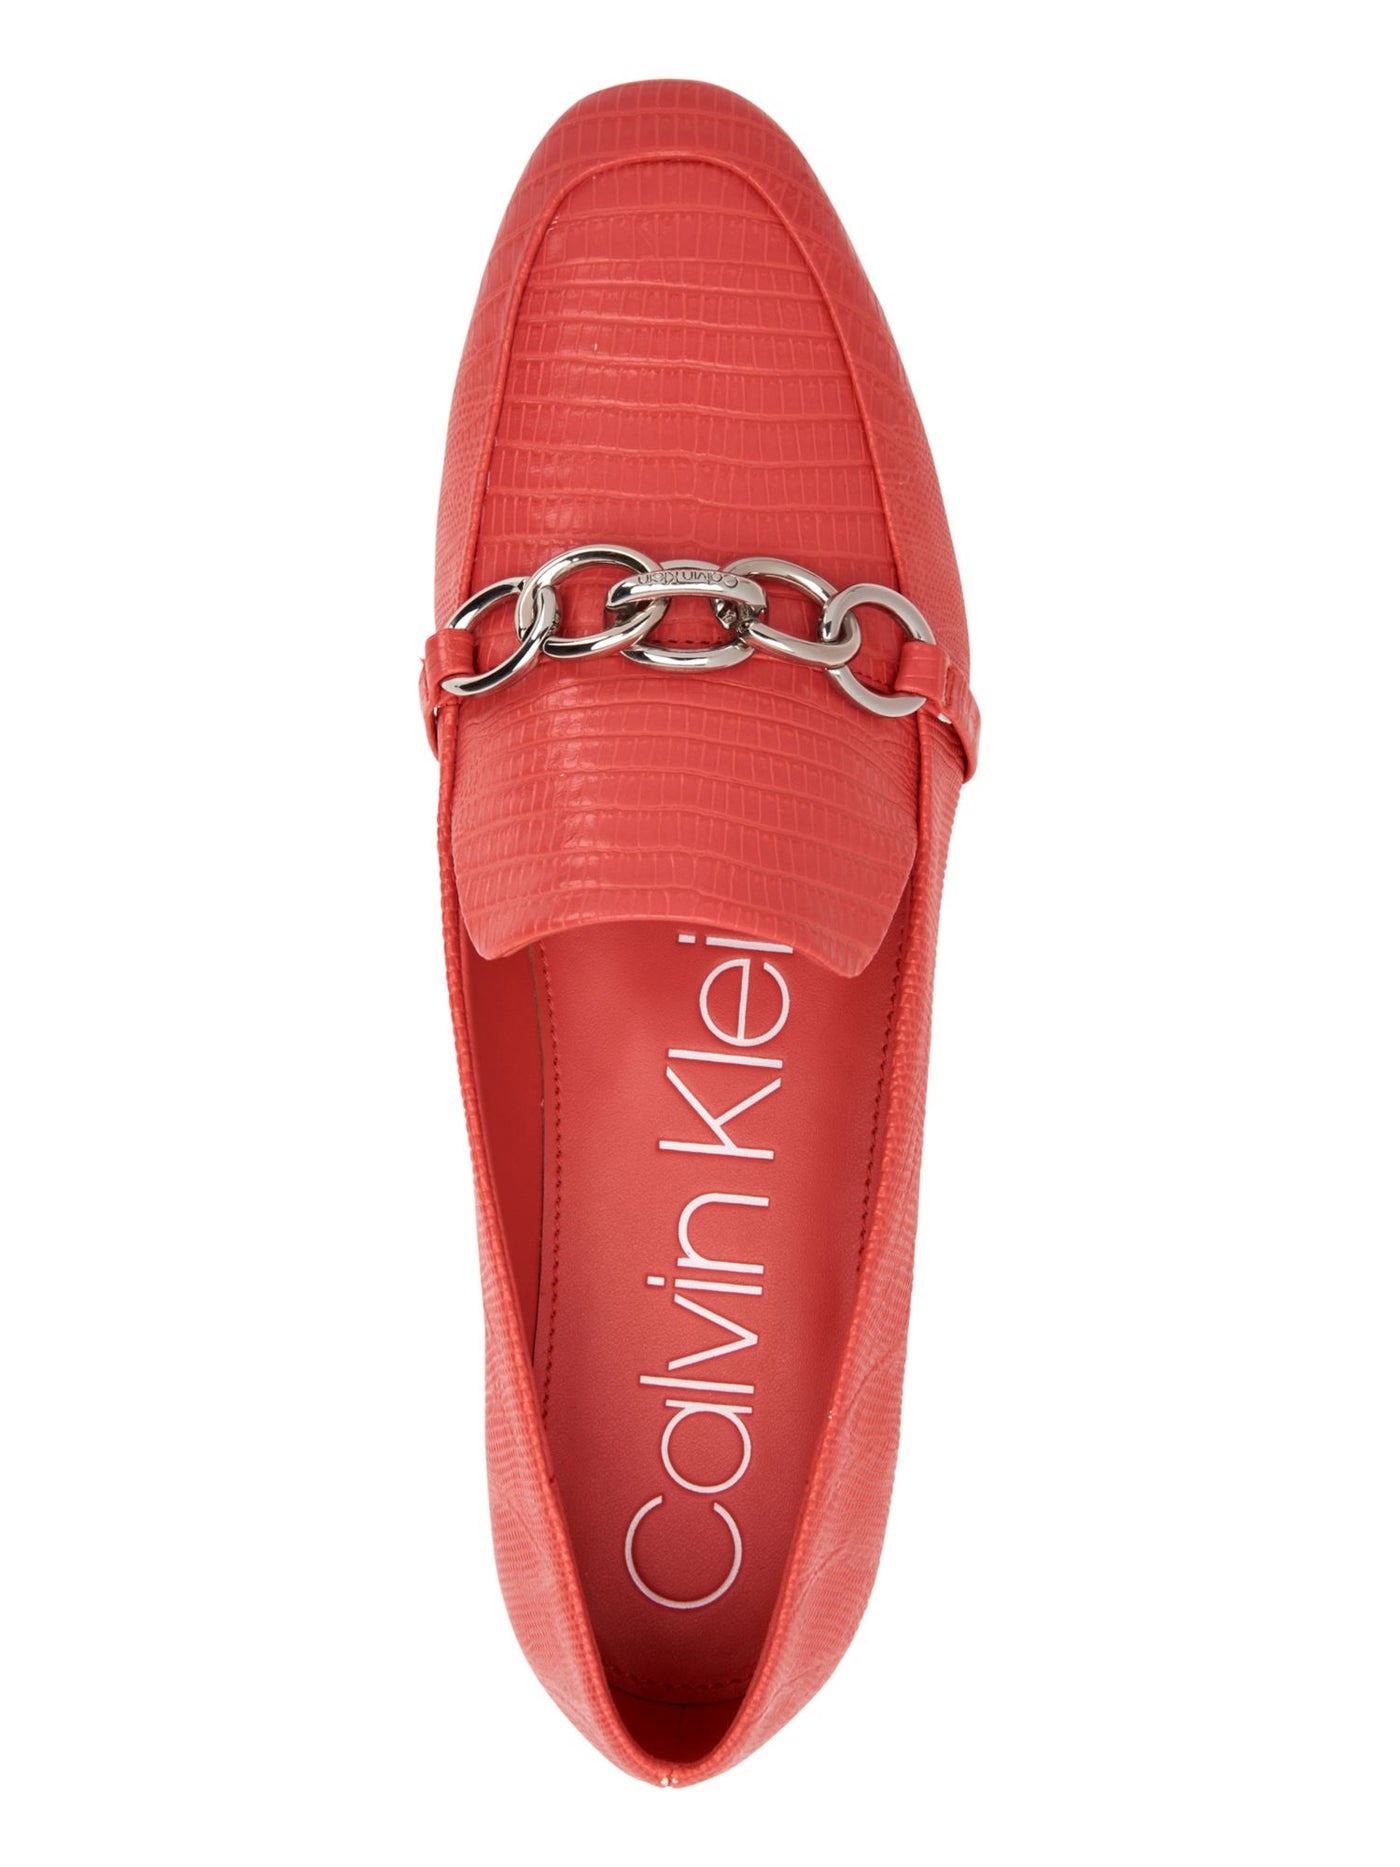 CALVIN KLEIN Womens Coral Signature Chain-Link Banda Round Toe Slip On Loafers Shoes 7.5 M